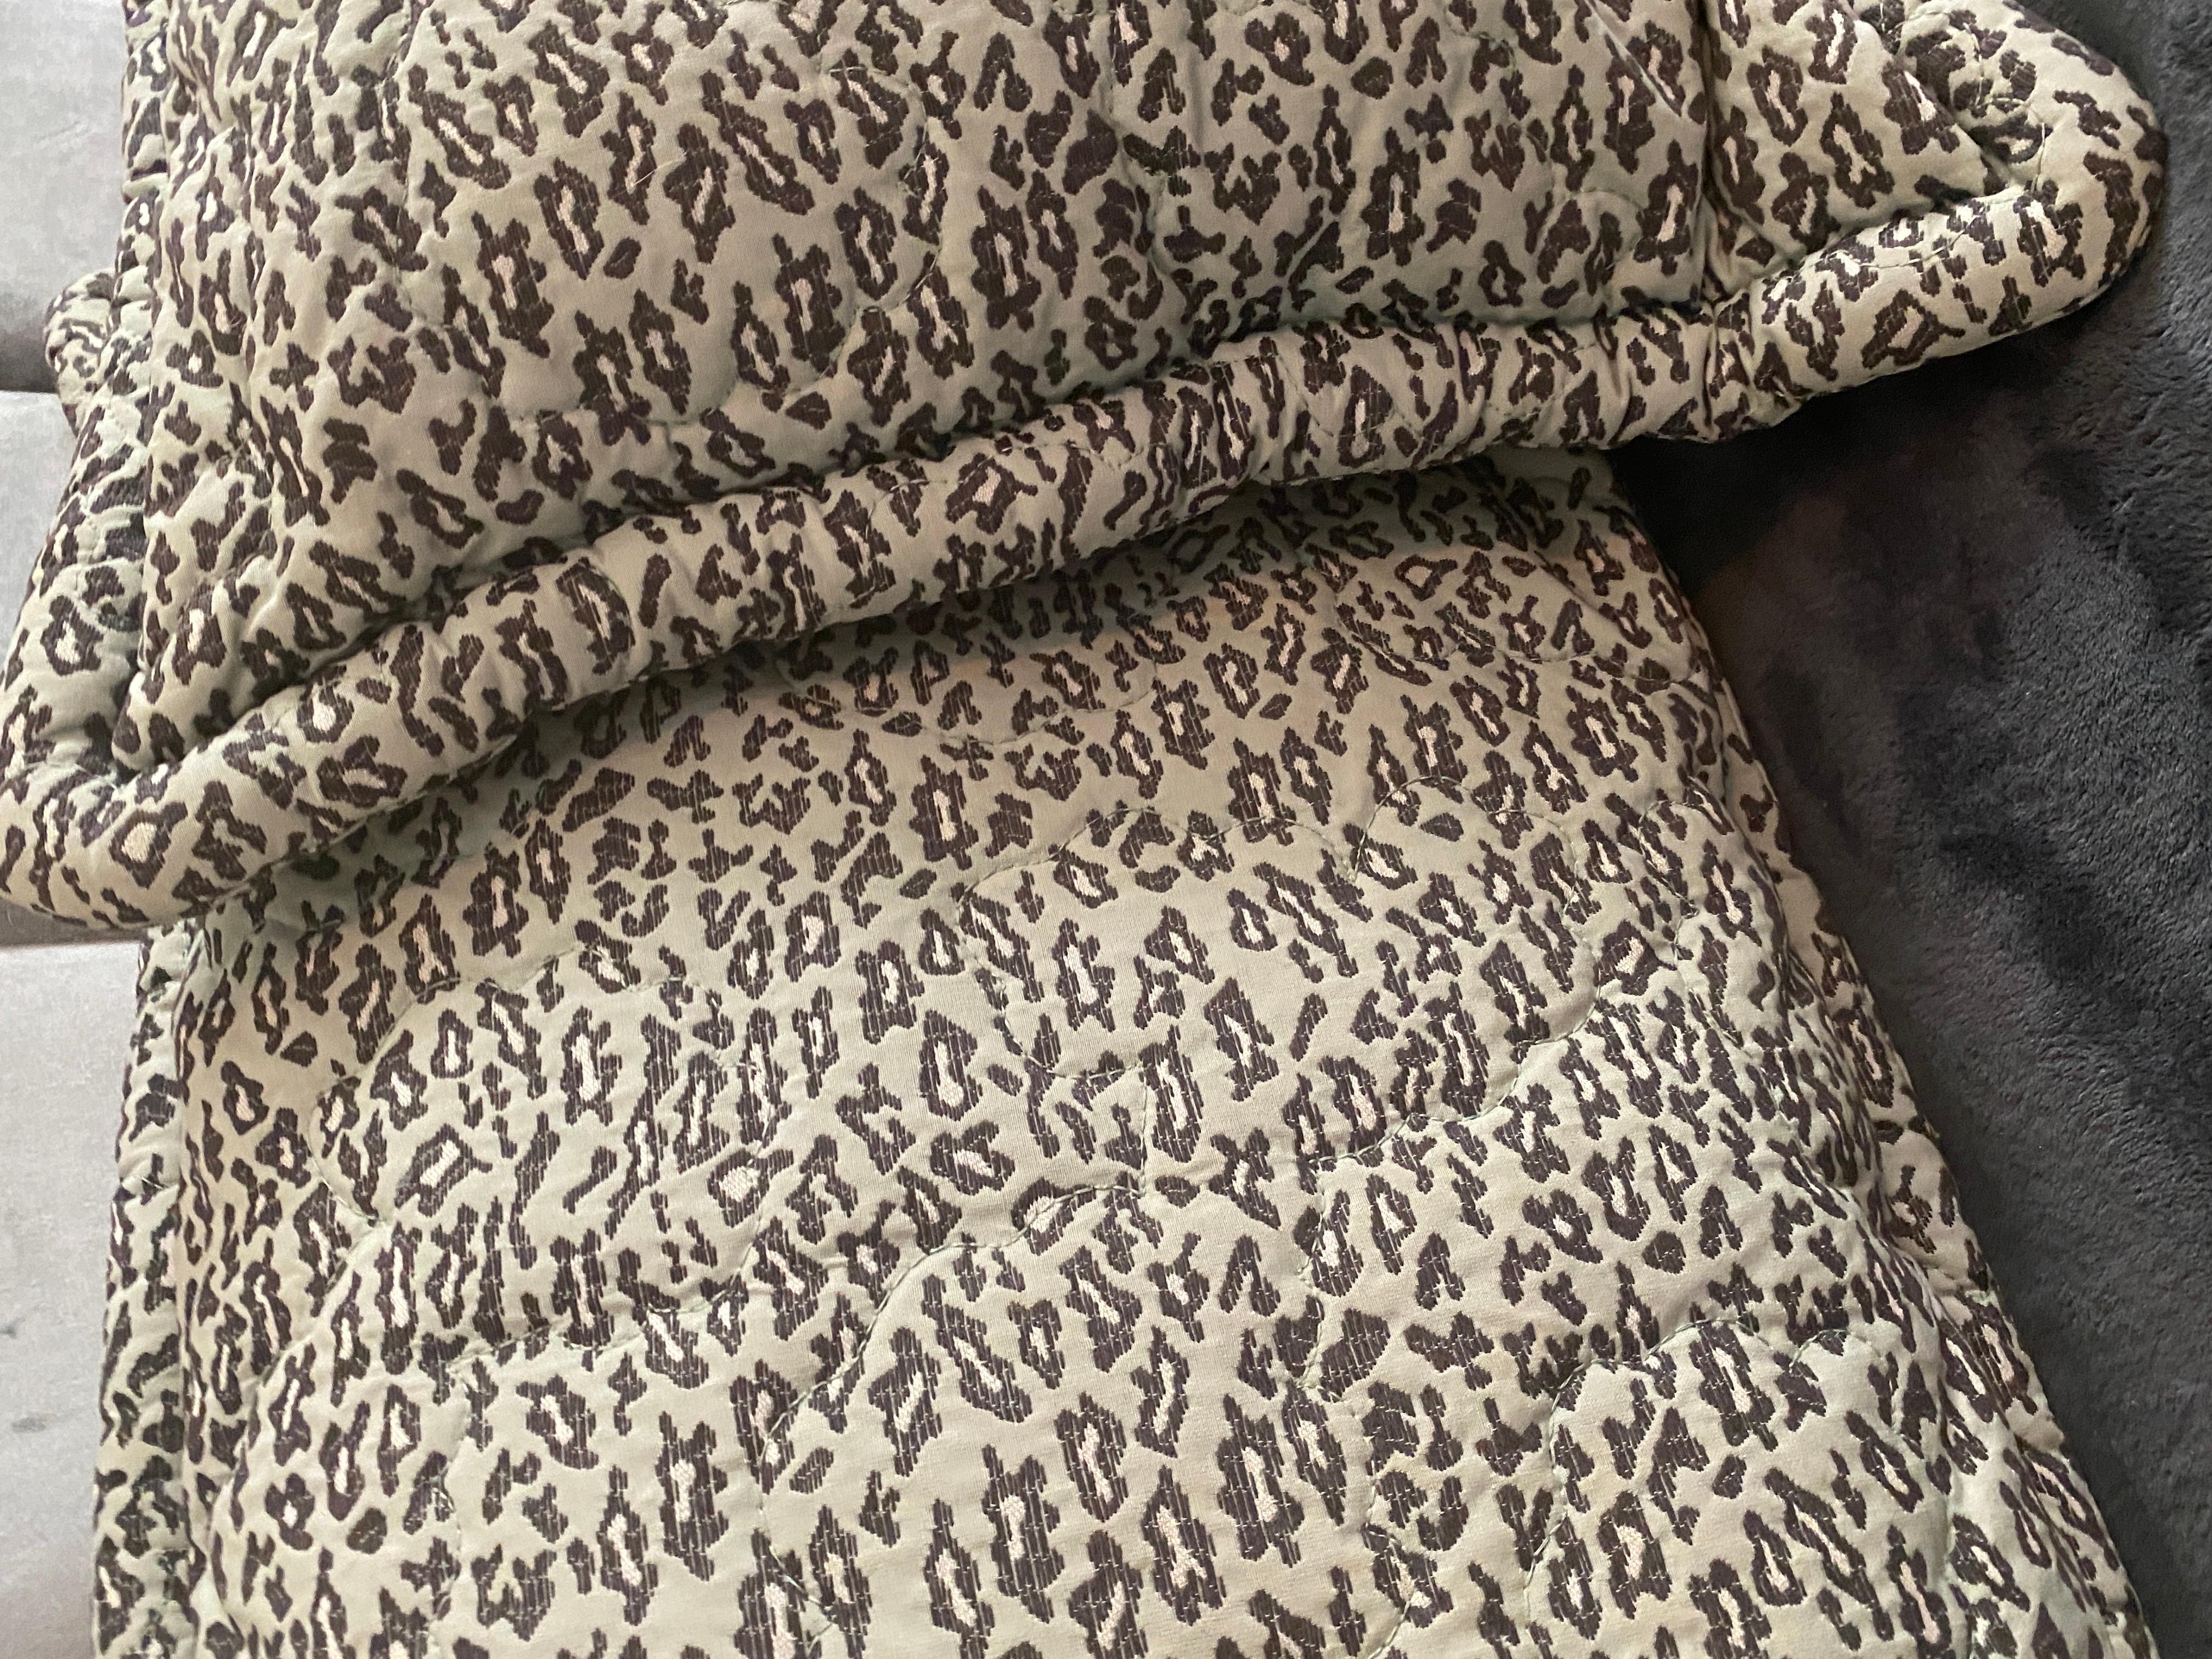 Pair of Rare Jay Spectre Quilted Pillow Shams in Mint & Black/White Leopard  For Sale 3